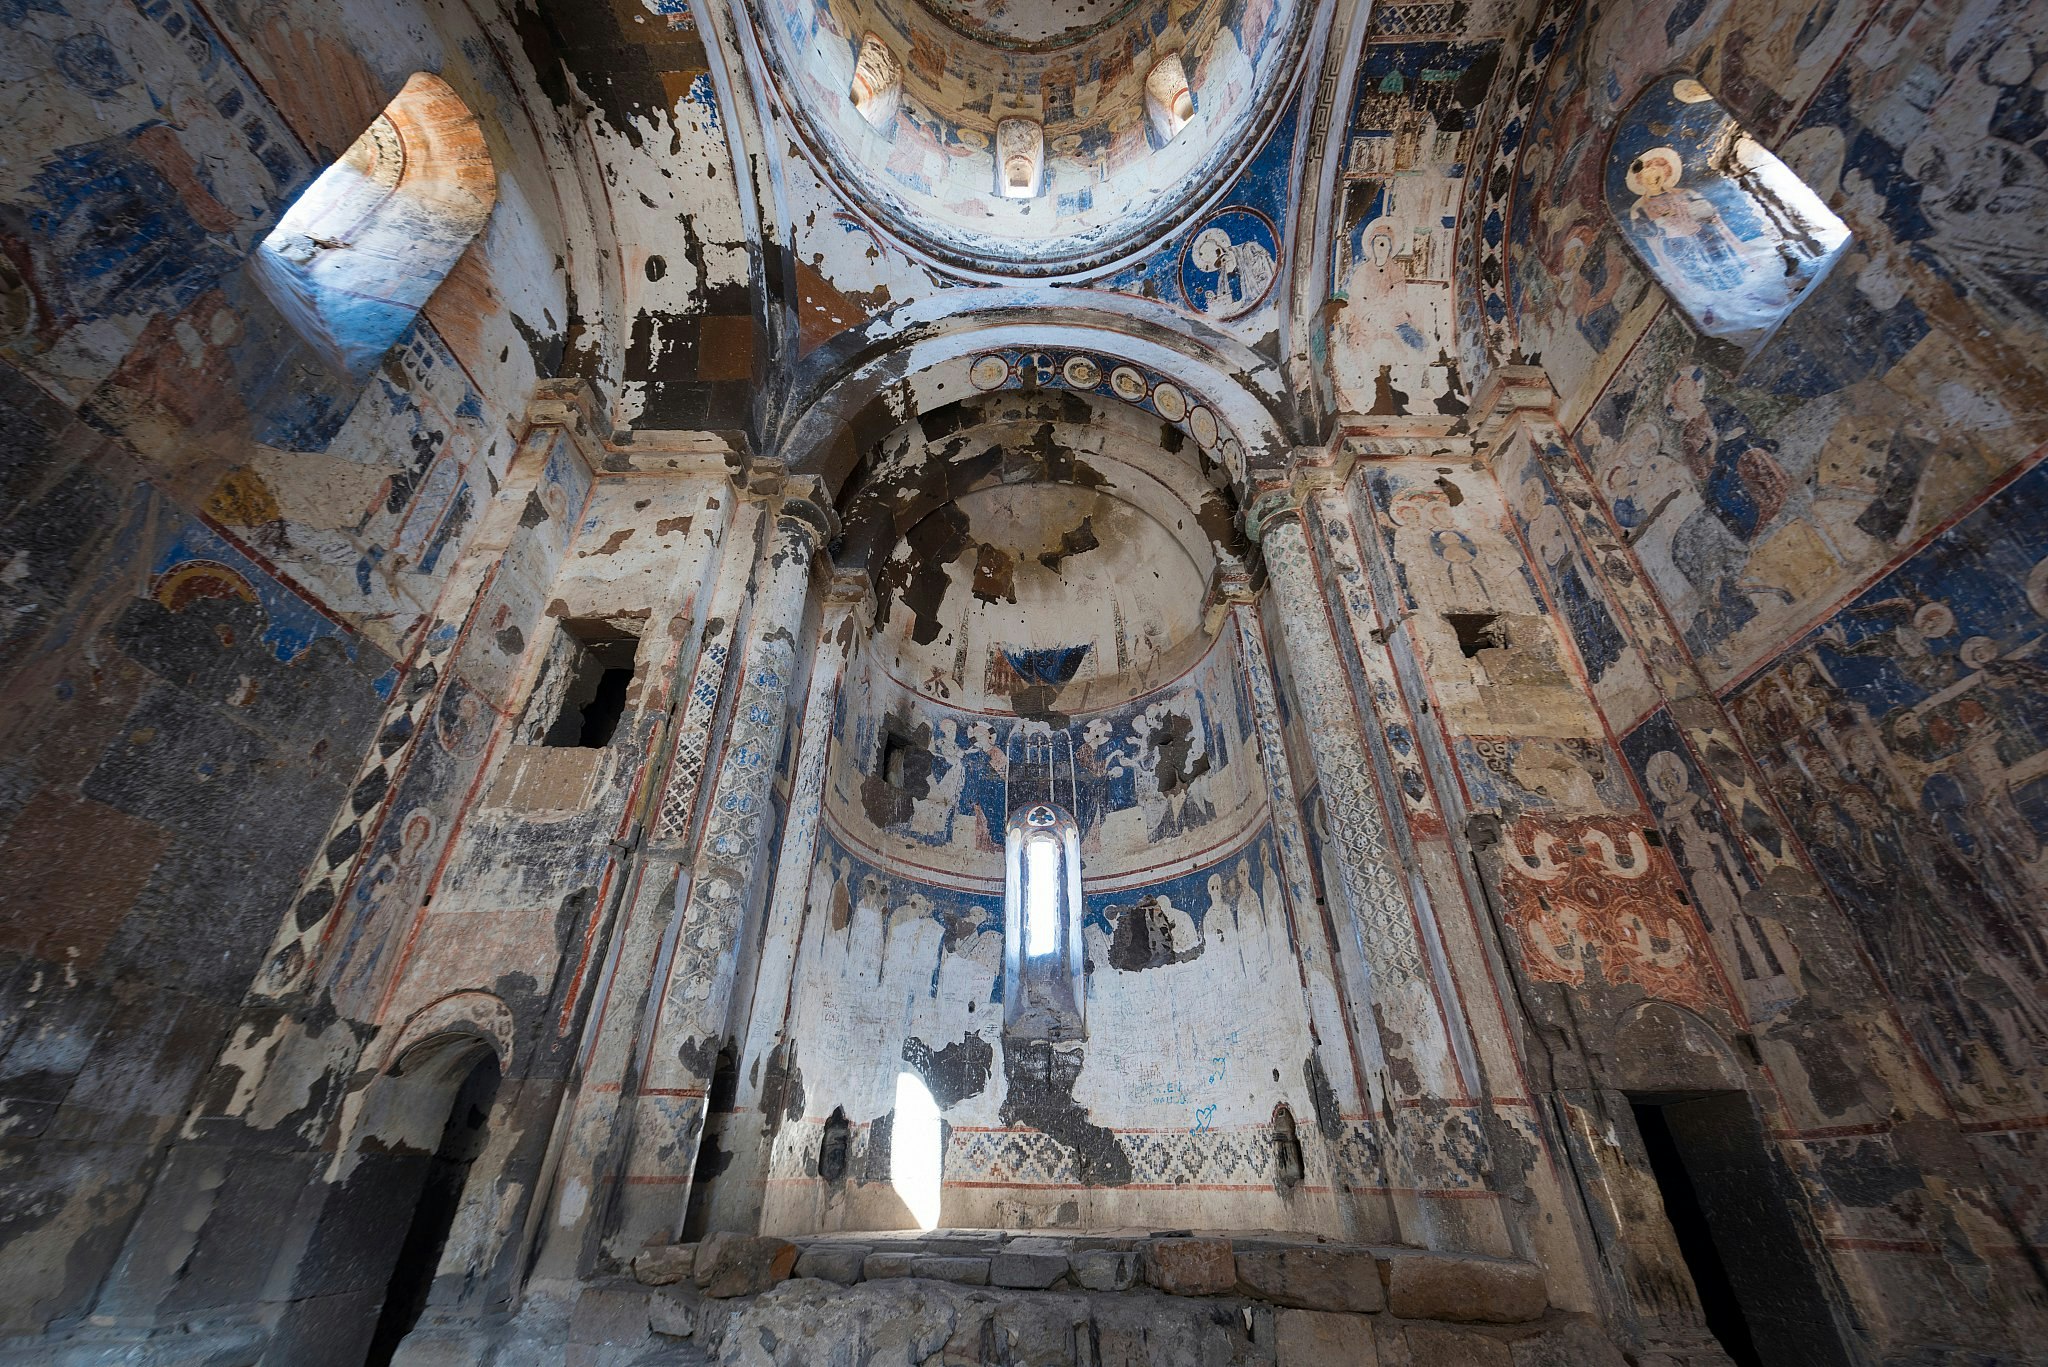 Colourful but faded and time-worn frescoes inside a domed church. 